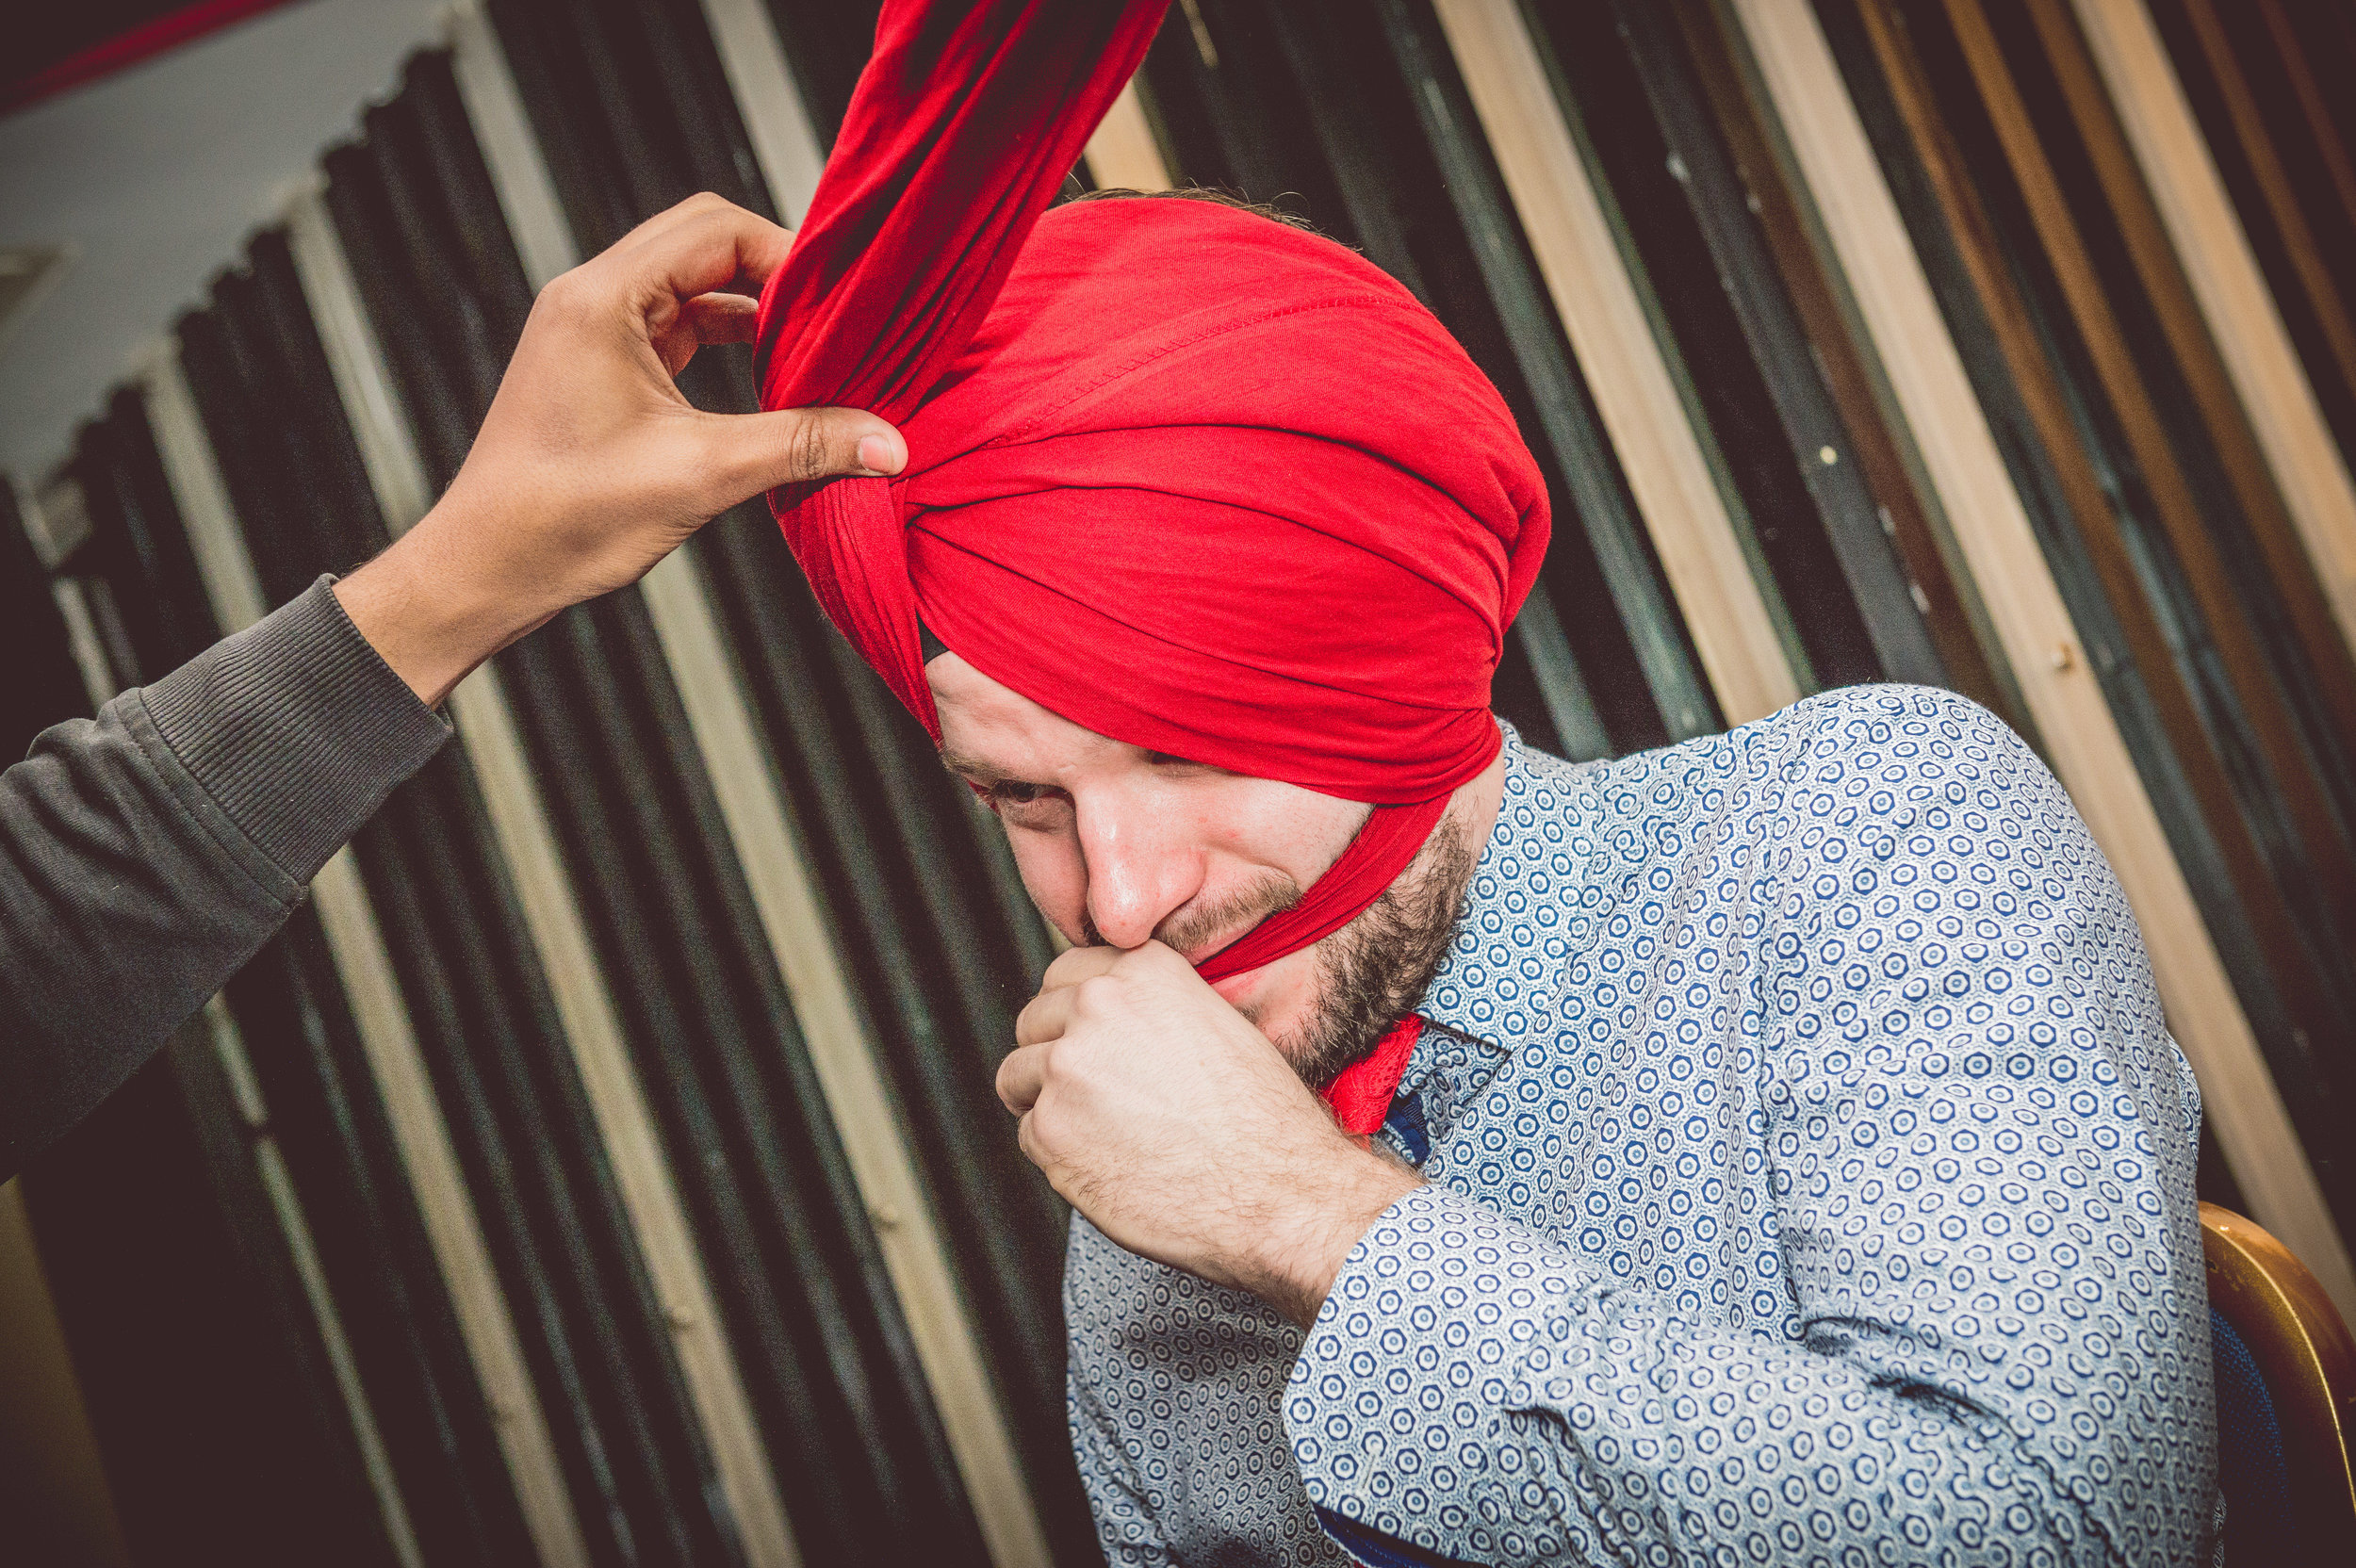  Sporting guests even agreed to put on the turban to attend this traditional Sikh wedding. 